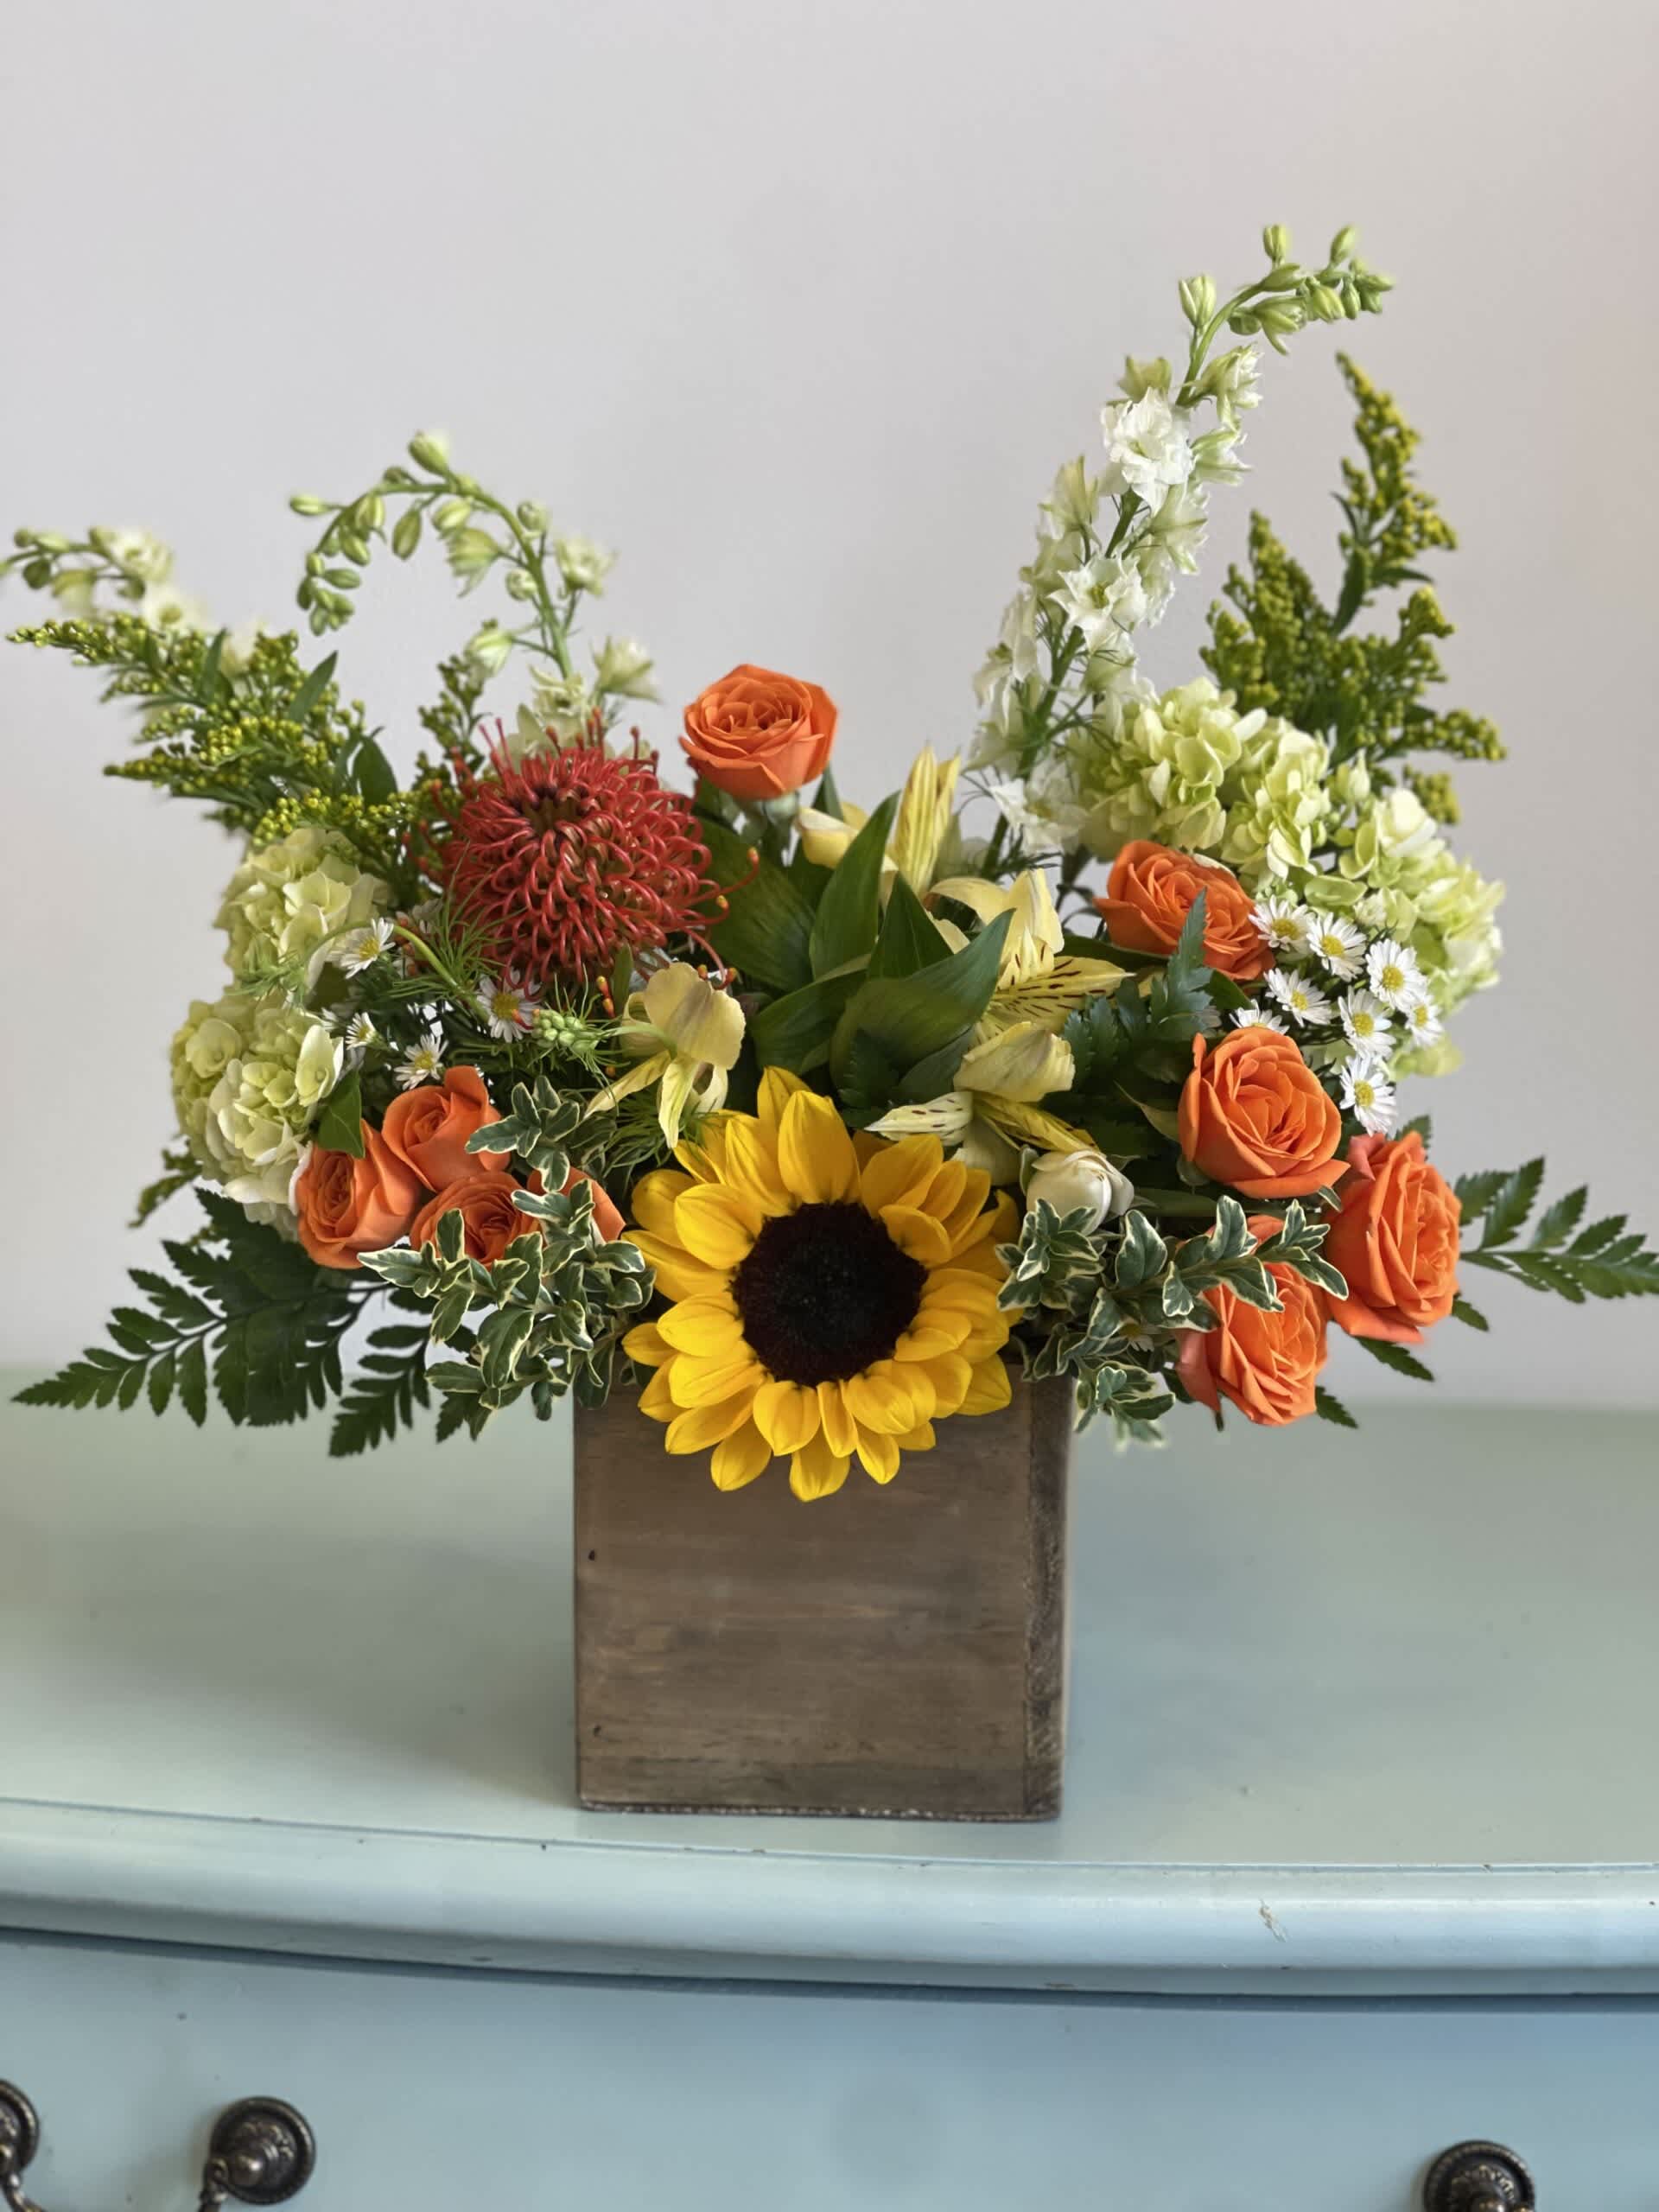 Sunshine Bloom Box - The organic feel to this arrangement will bring warmth to any space! It is sure to brighten anyone’s day!